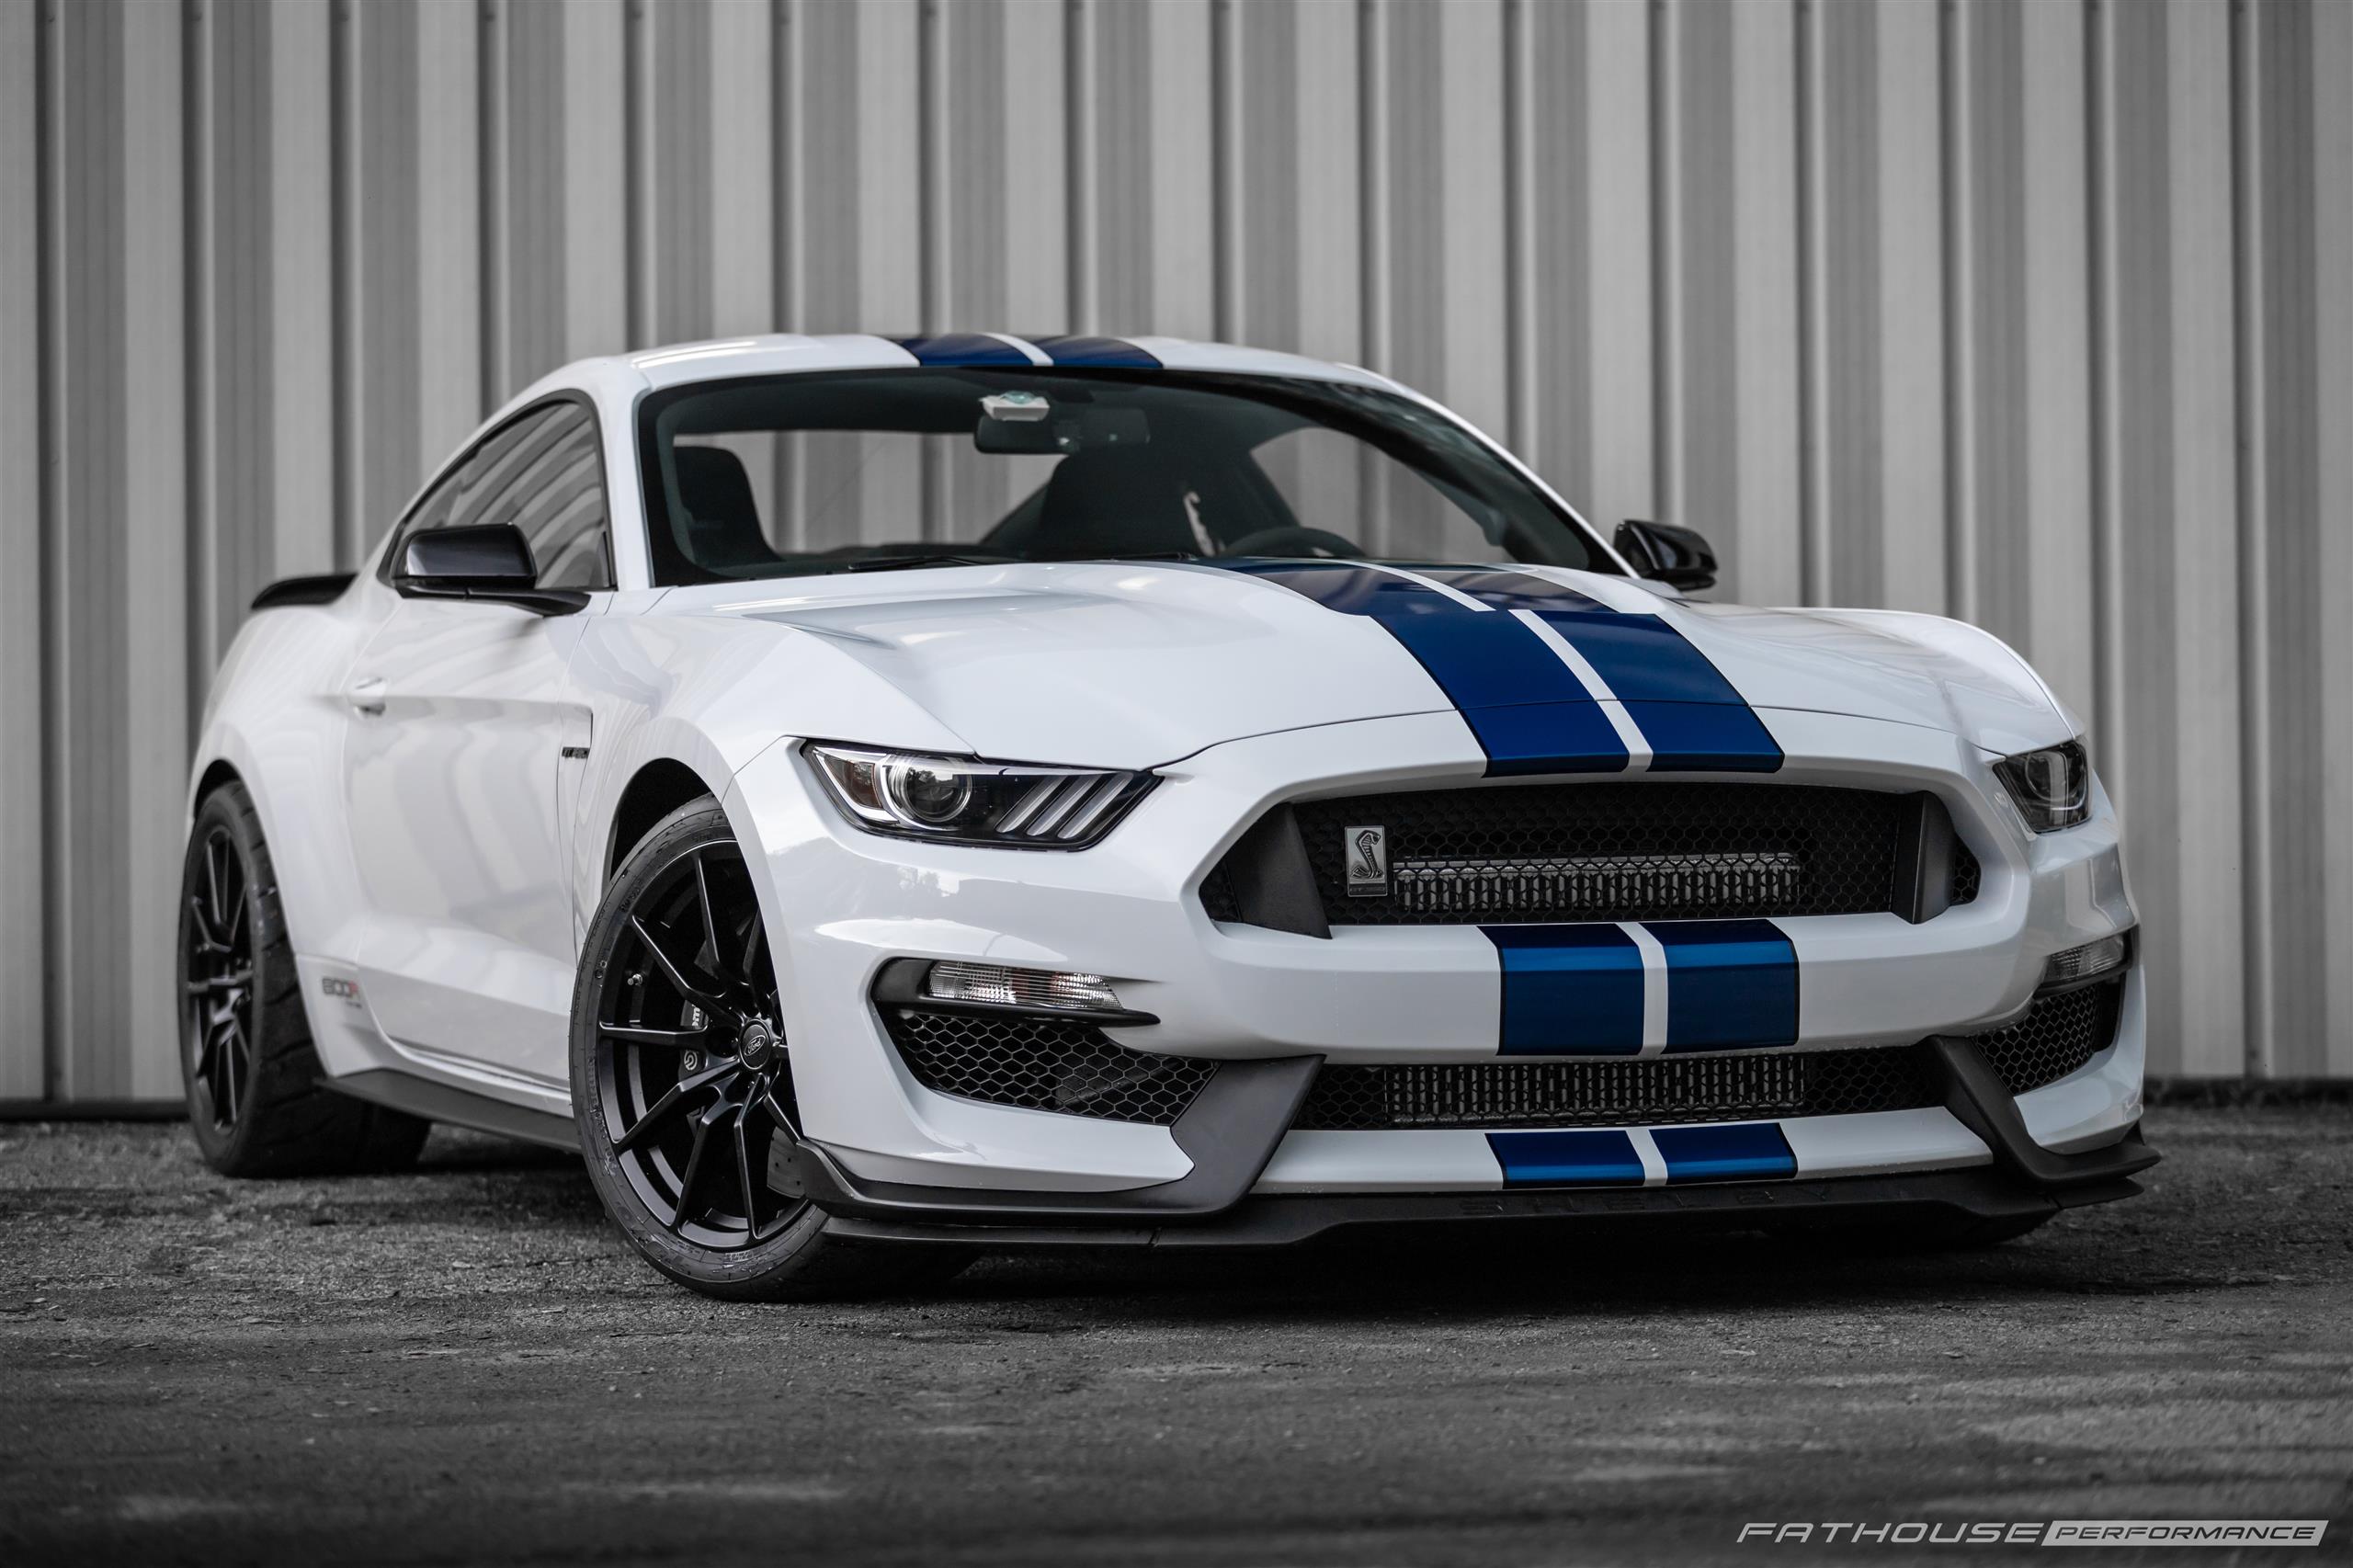 Gary’s 800R Shelby GT350 #33